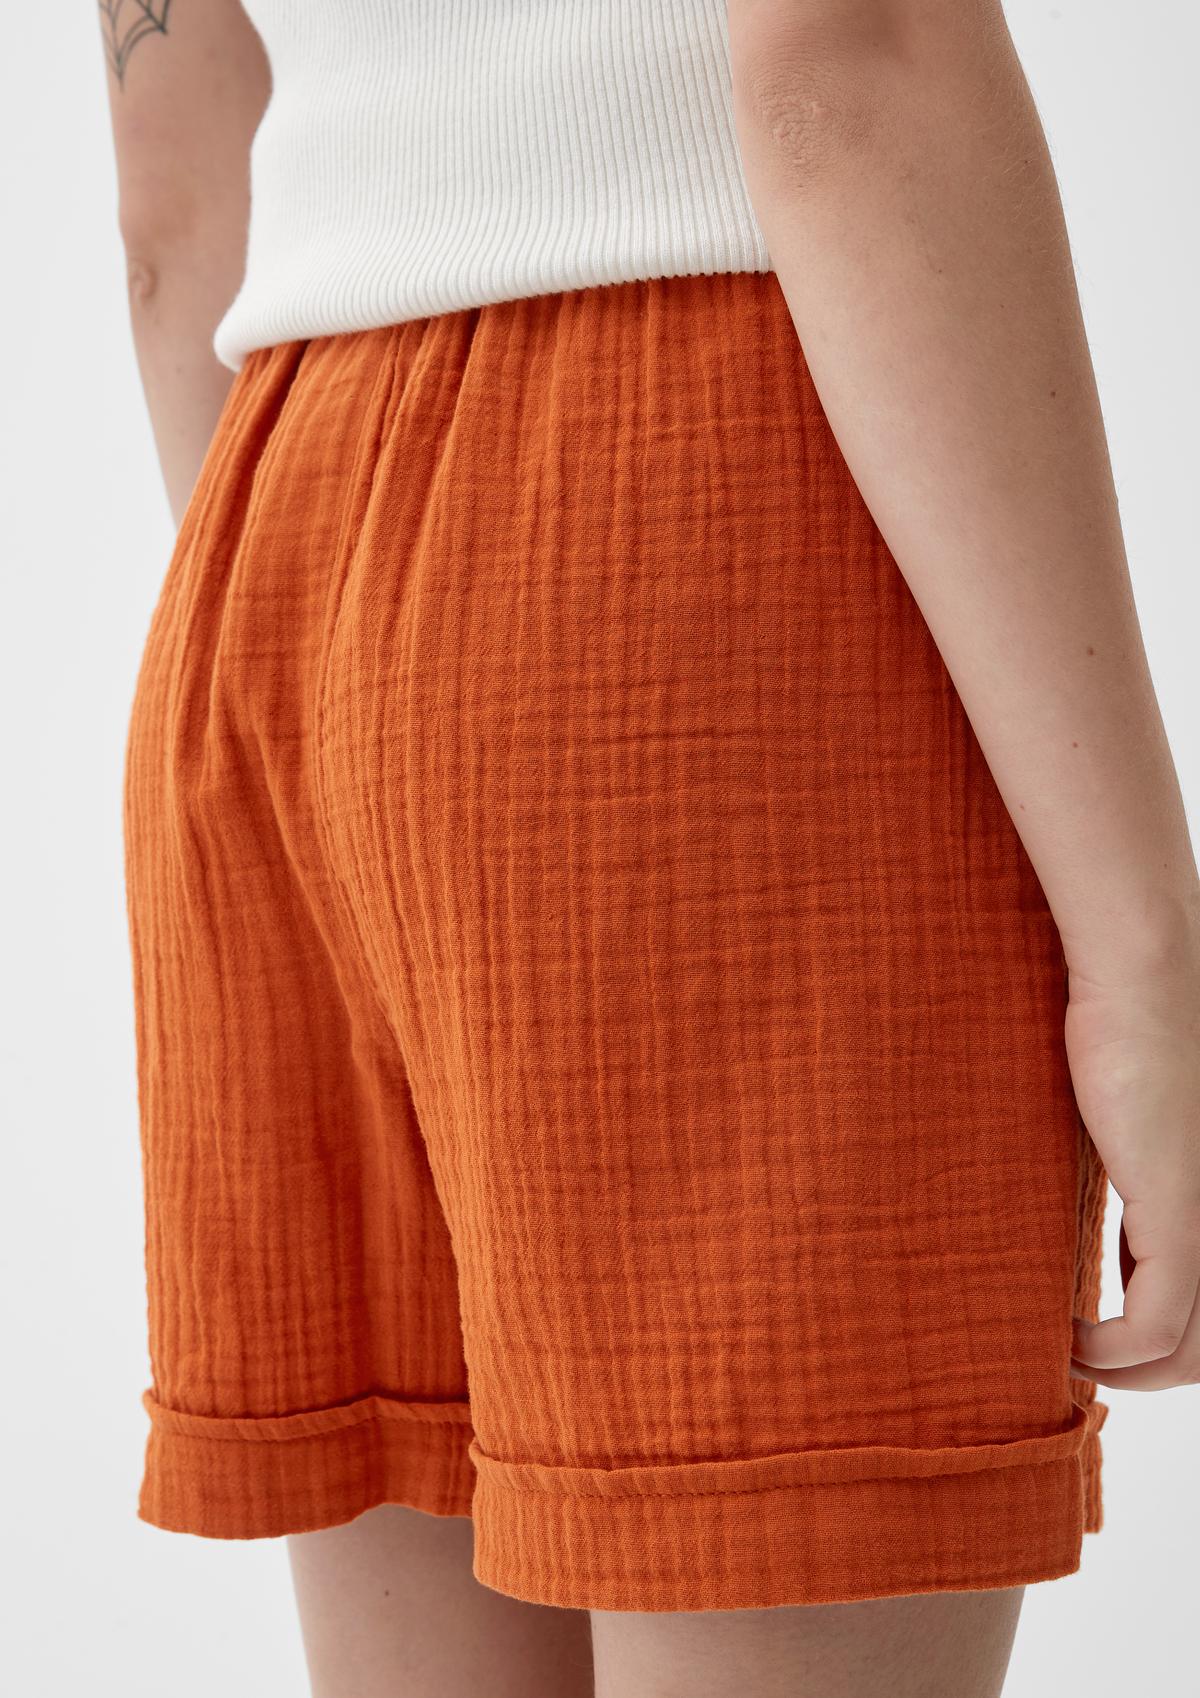 s.Oliver Regular fit: shorts with muslin texture